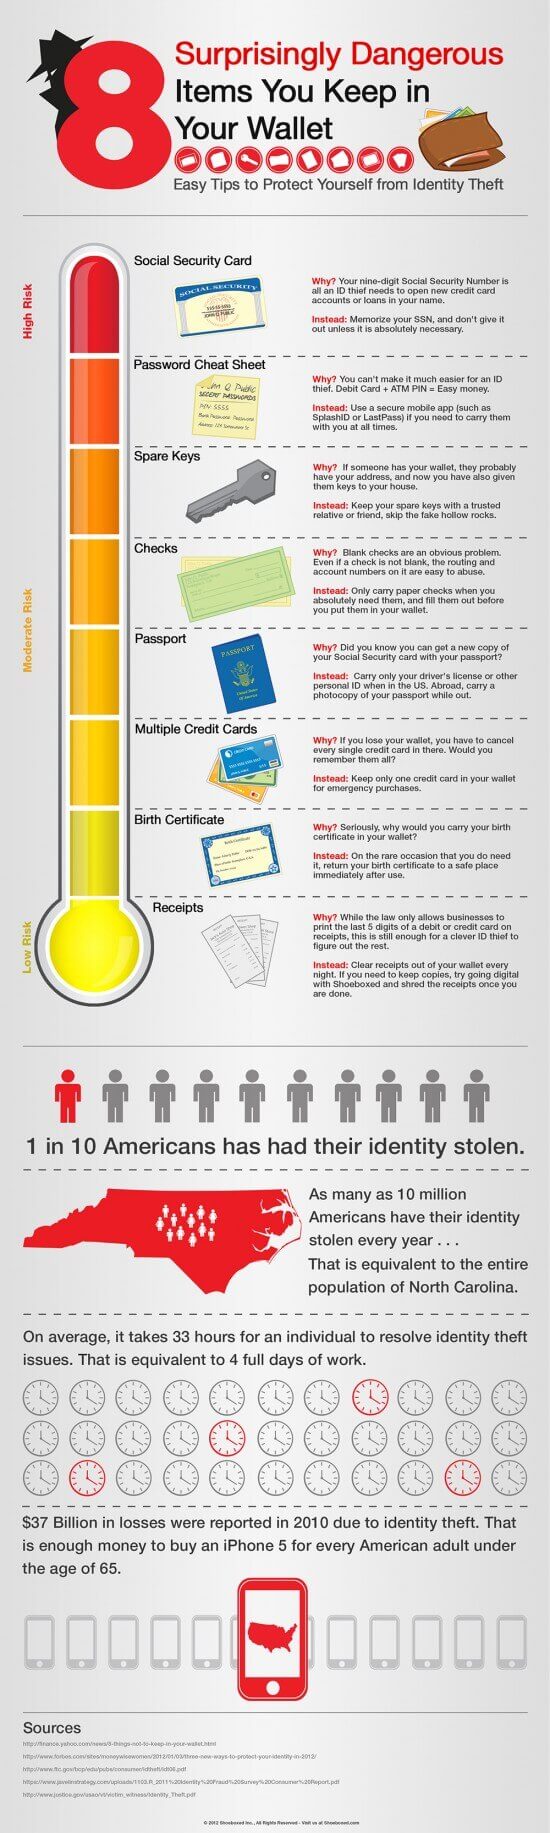 8_surprisingly_dangerous_items_you_keep_in_your_wallet_infographic-1000px1